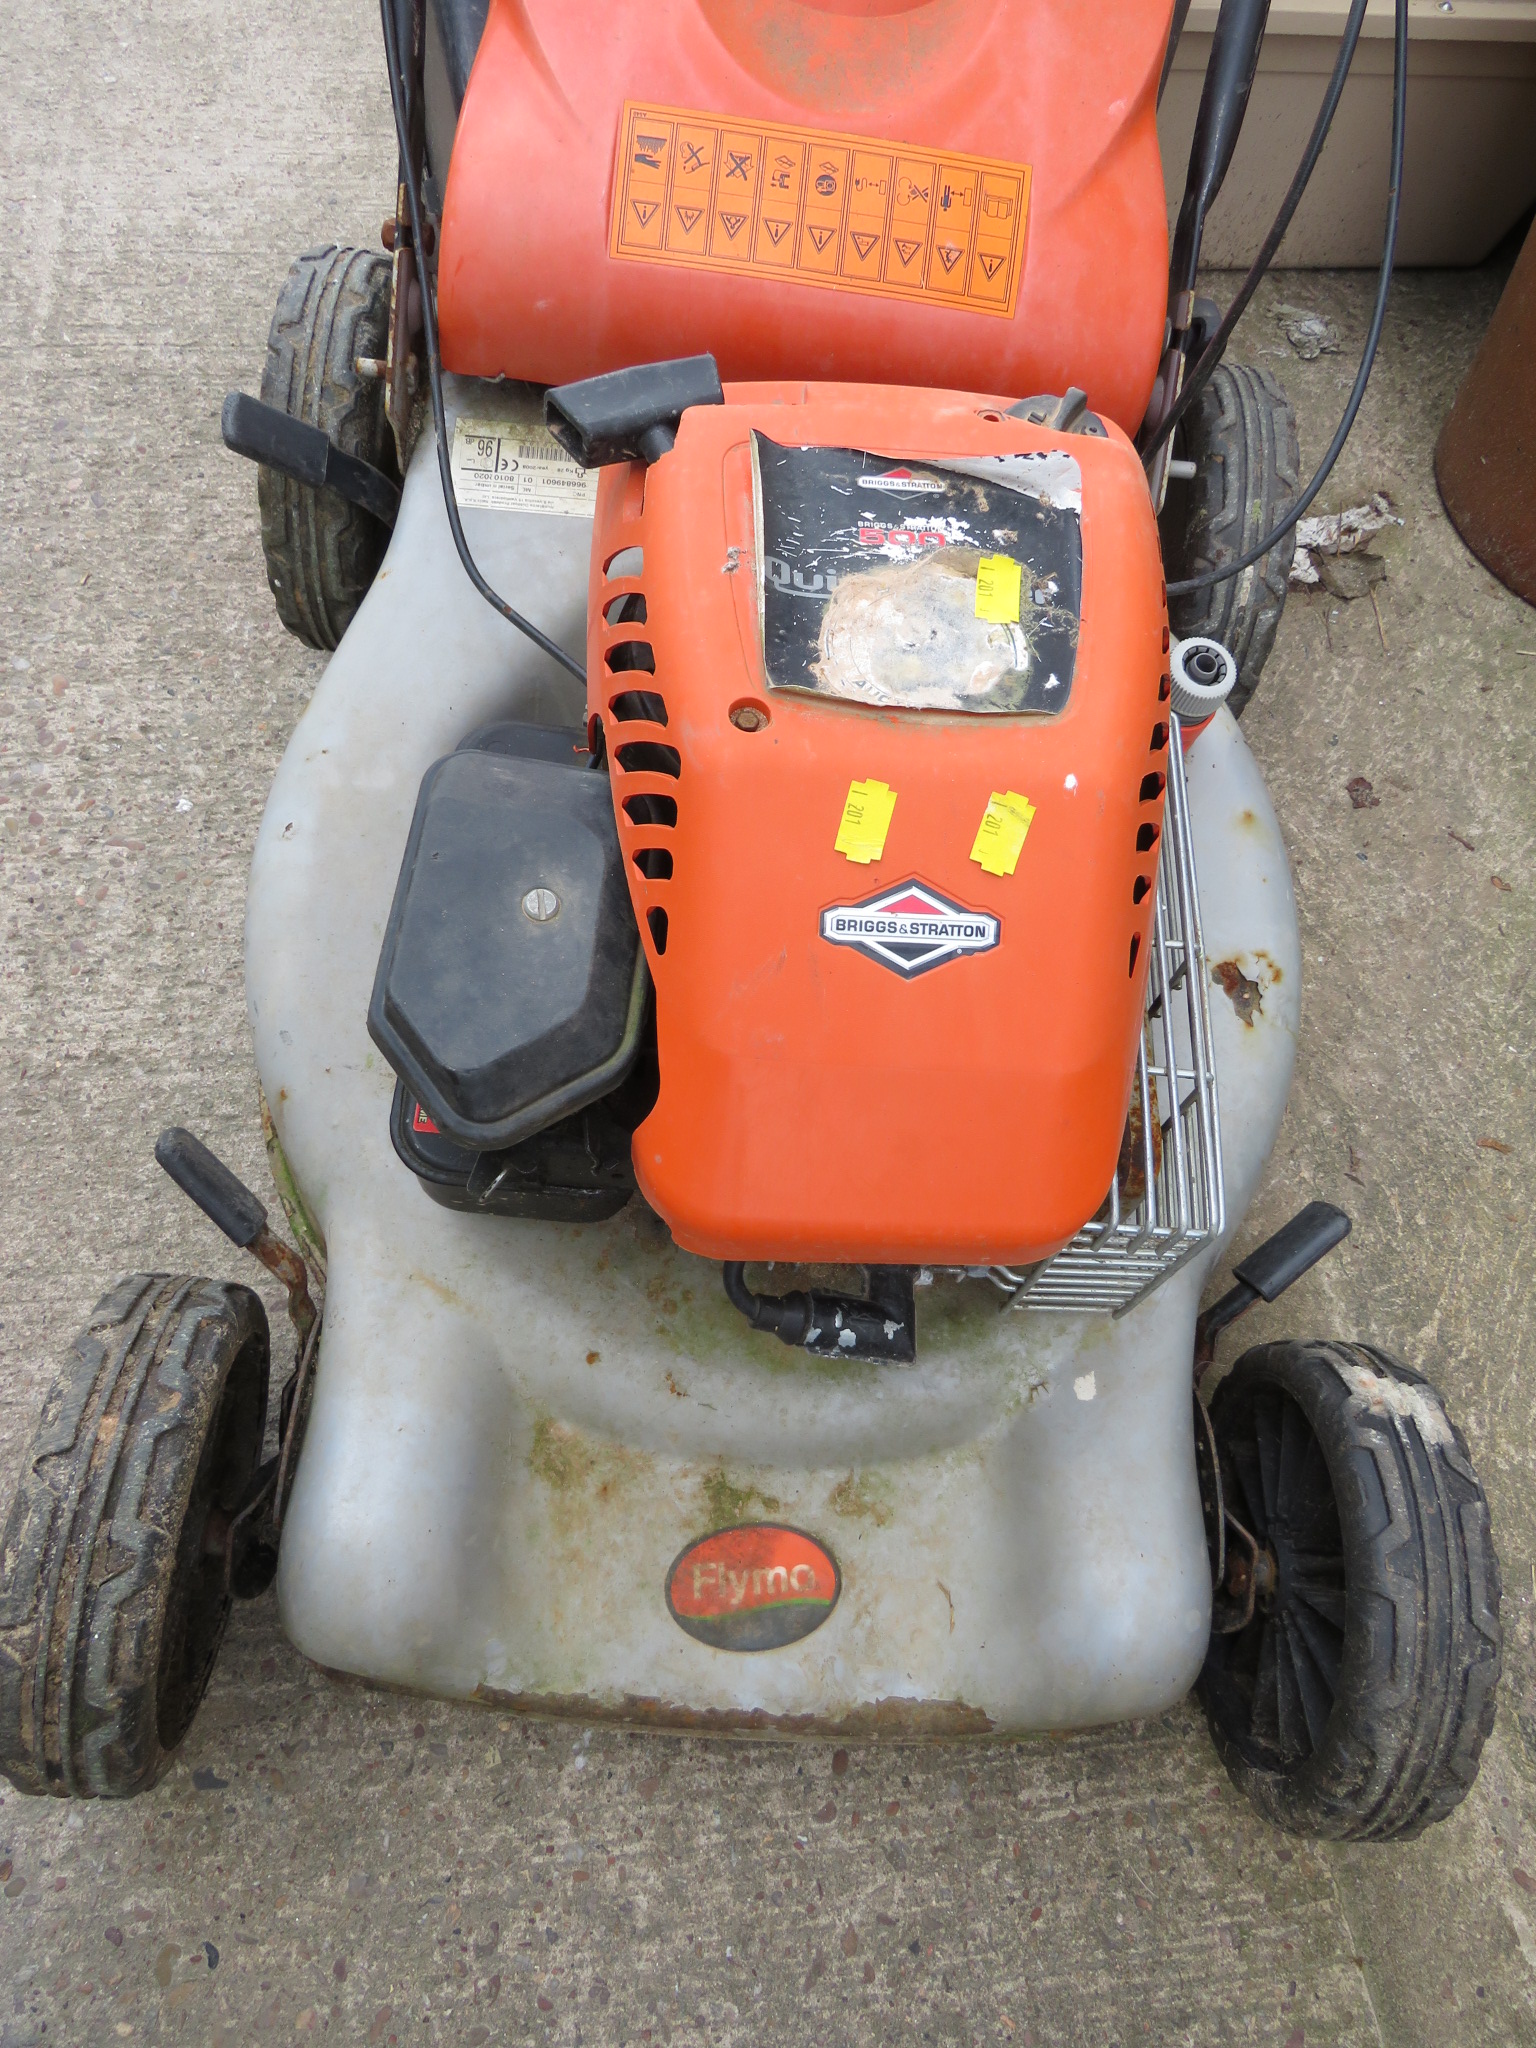 FLYMO LAWNMOWER WITH BRIGGS AND STRATTON PETROL ENGINE - Image 2 of 2